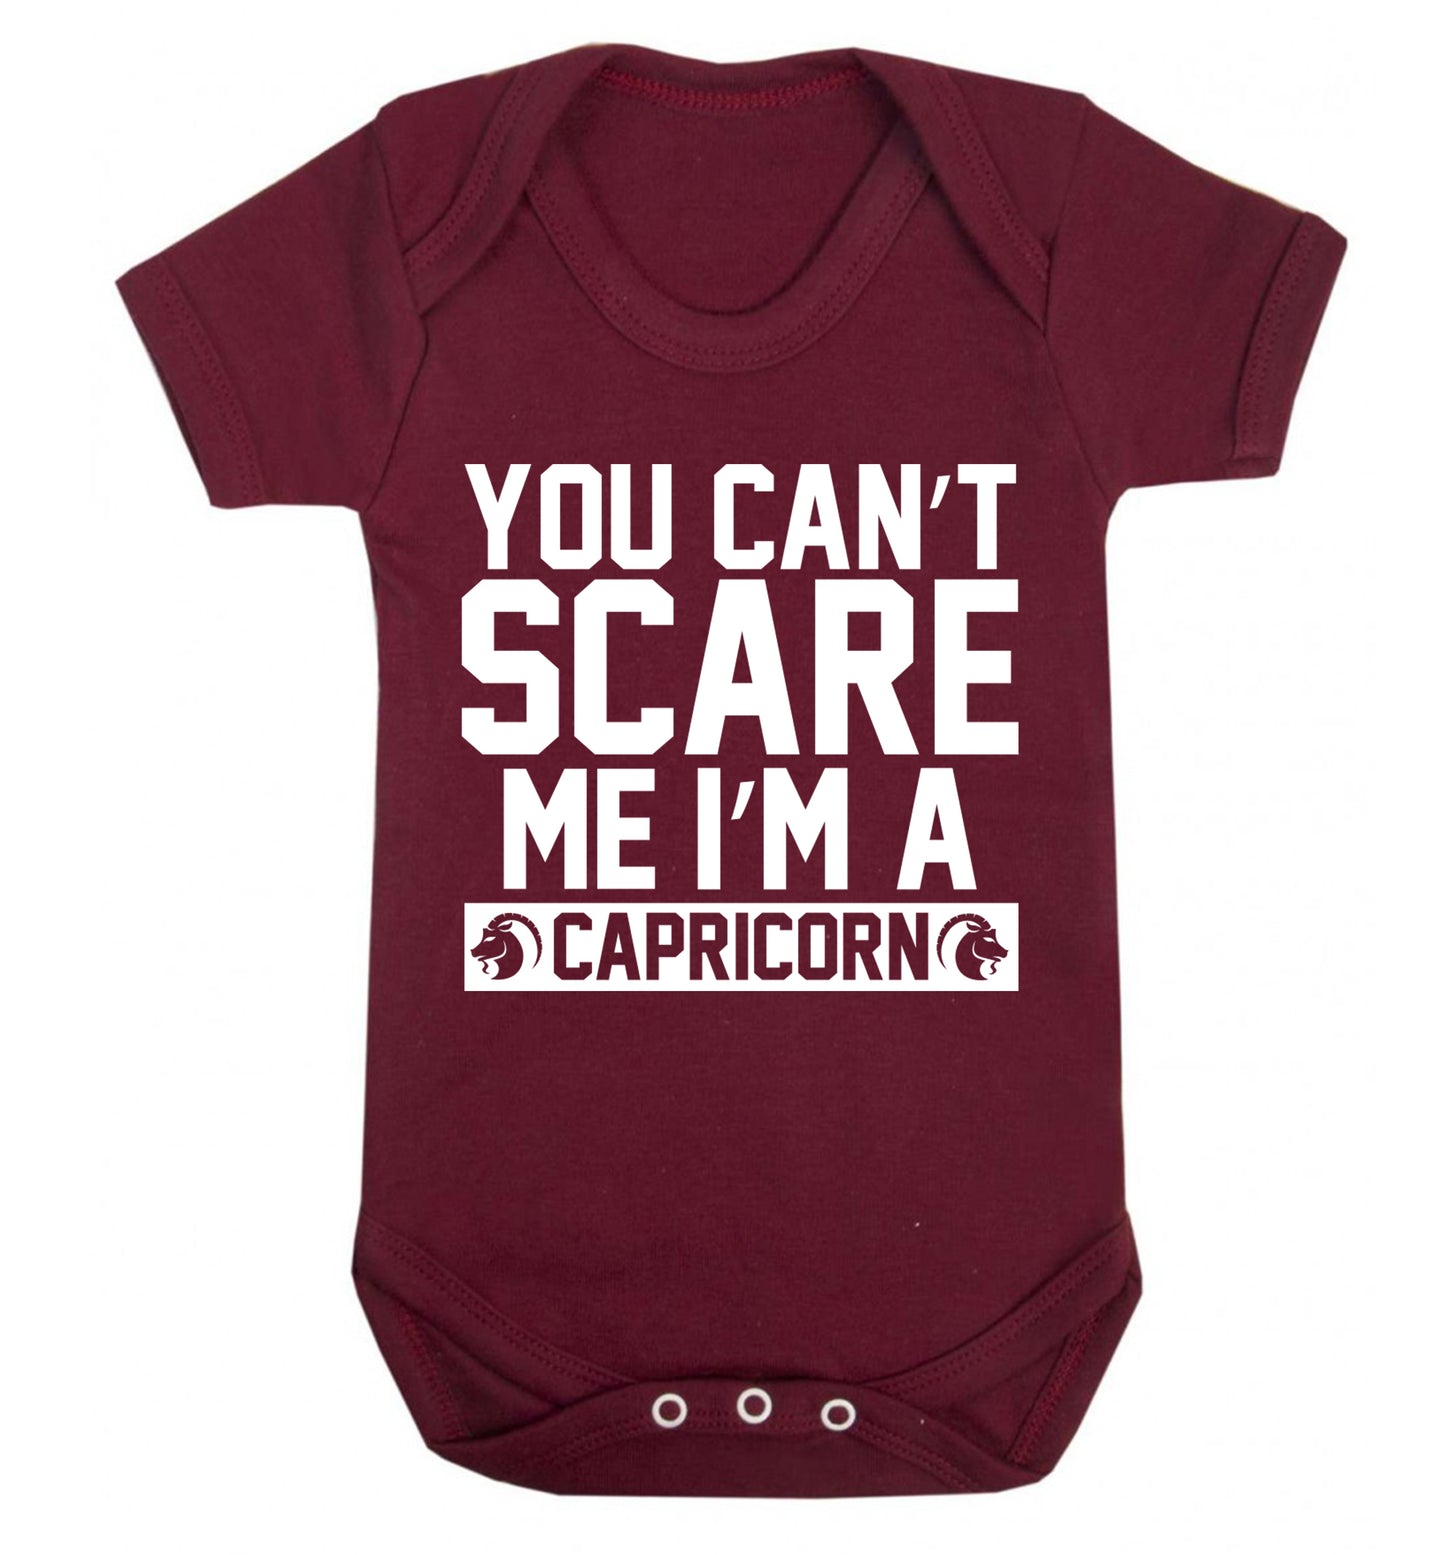 You can't scare me I'm a capricorn Baby Vest maroon 18-24 months